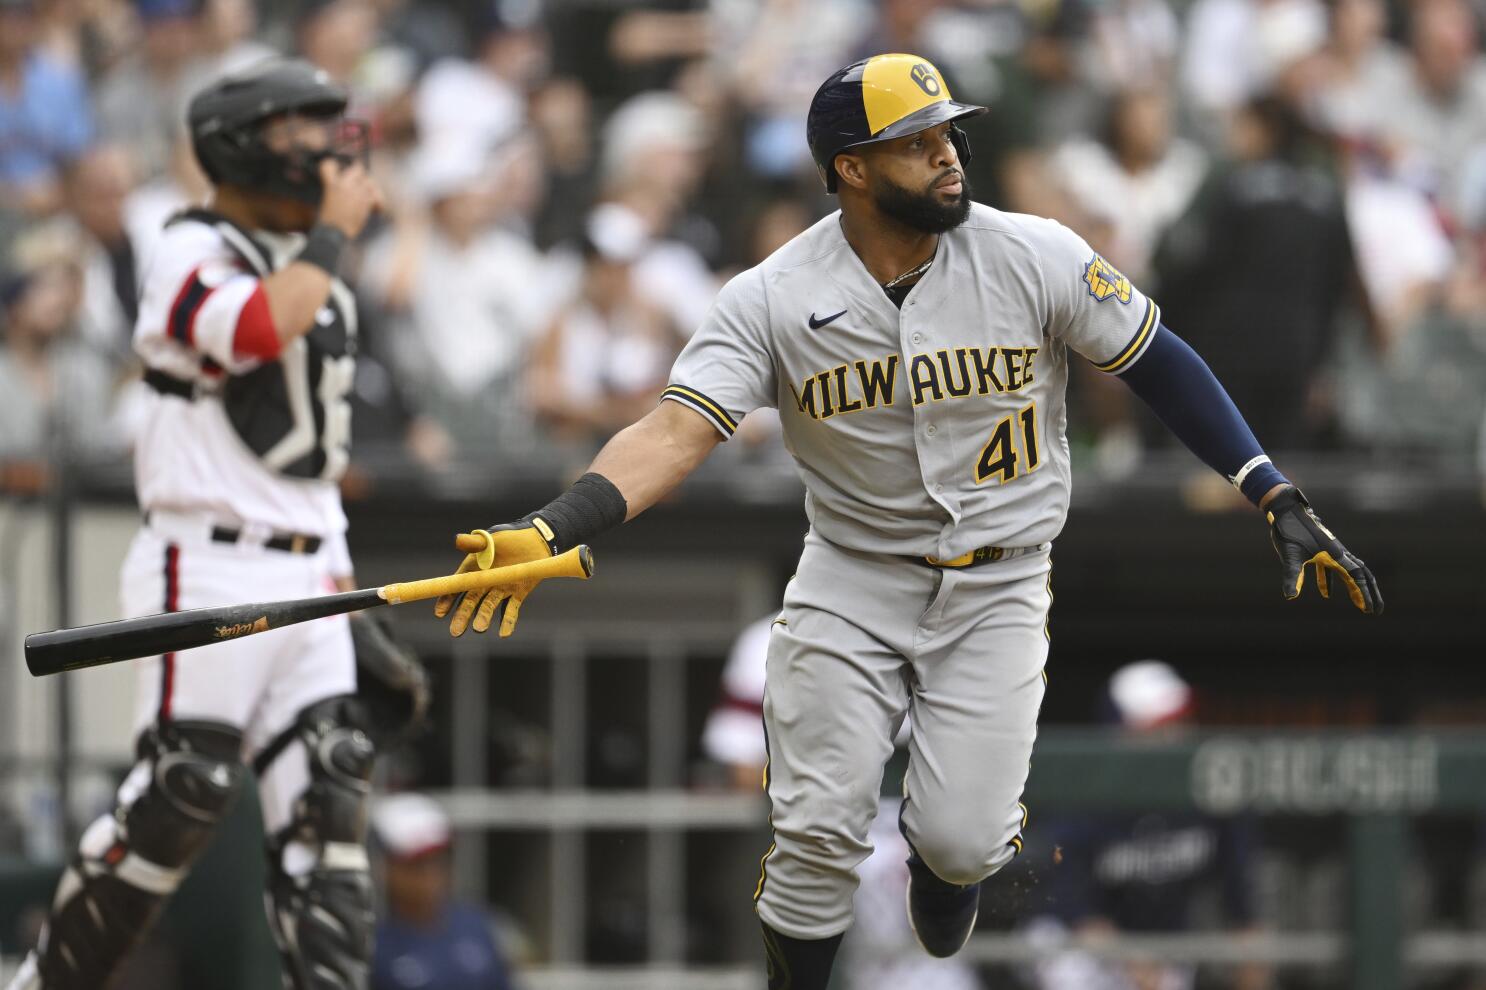 Brewers: Tagged for eight homers in two days